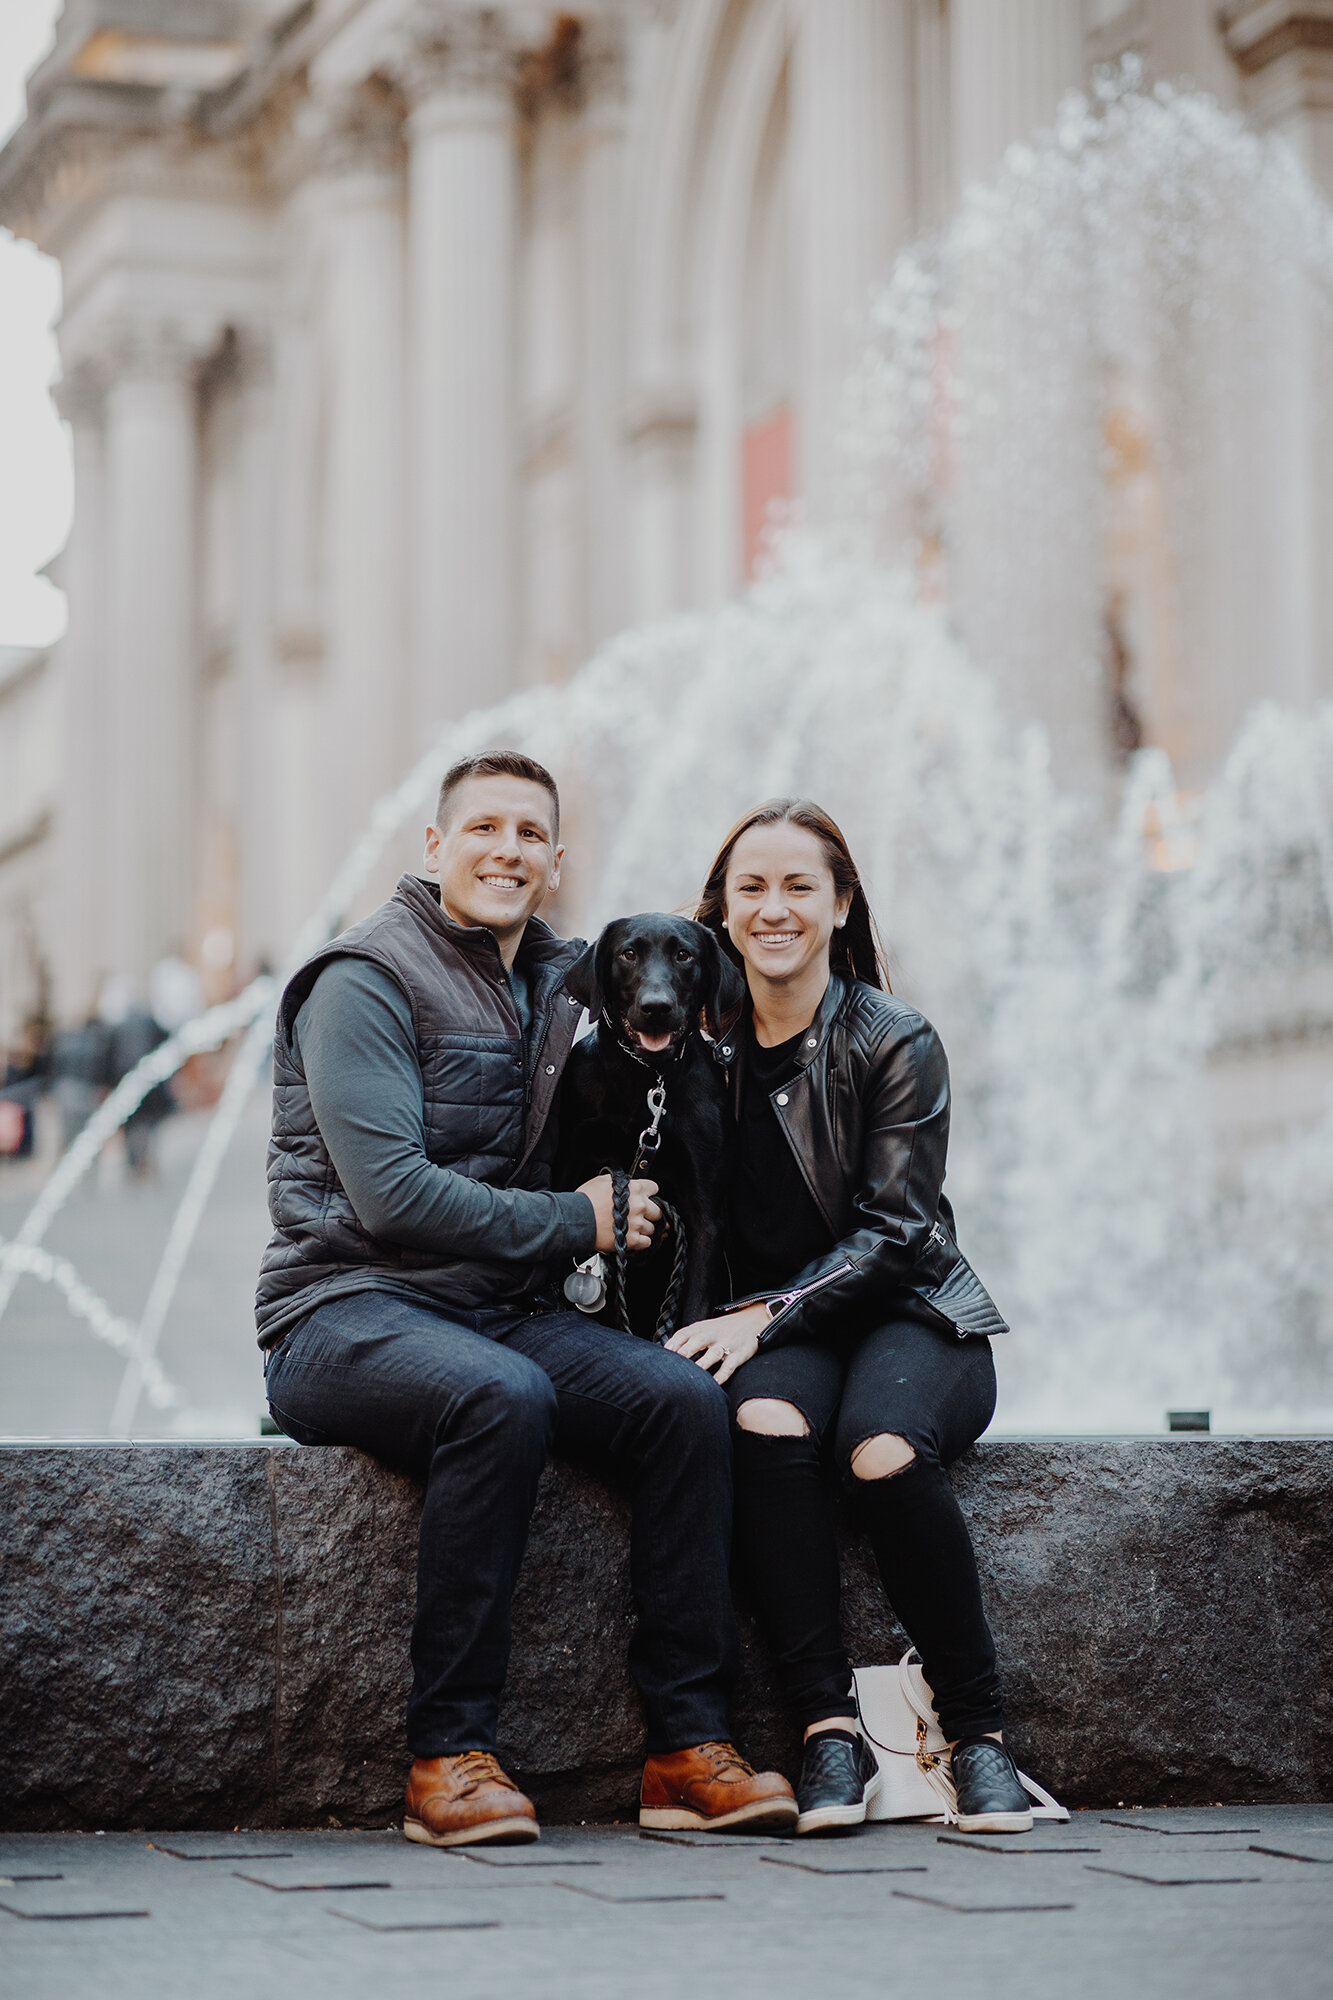 Romantic and Timeless Secret Proposal Photos in Central Park NYC